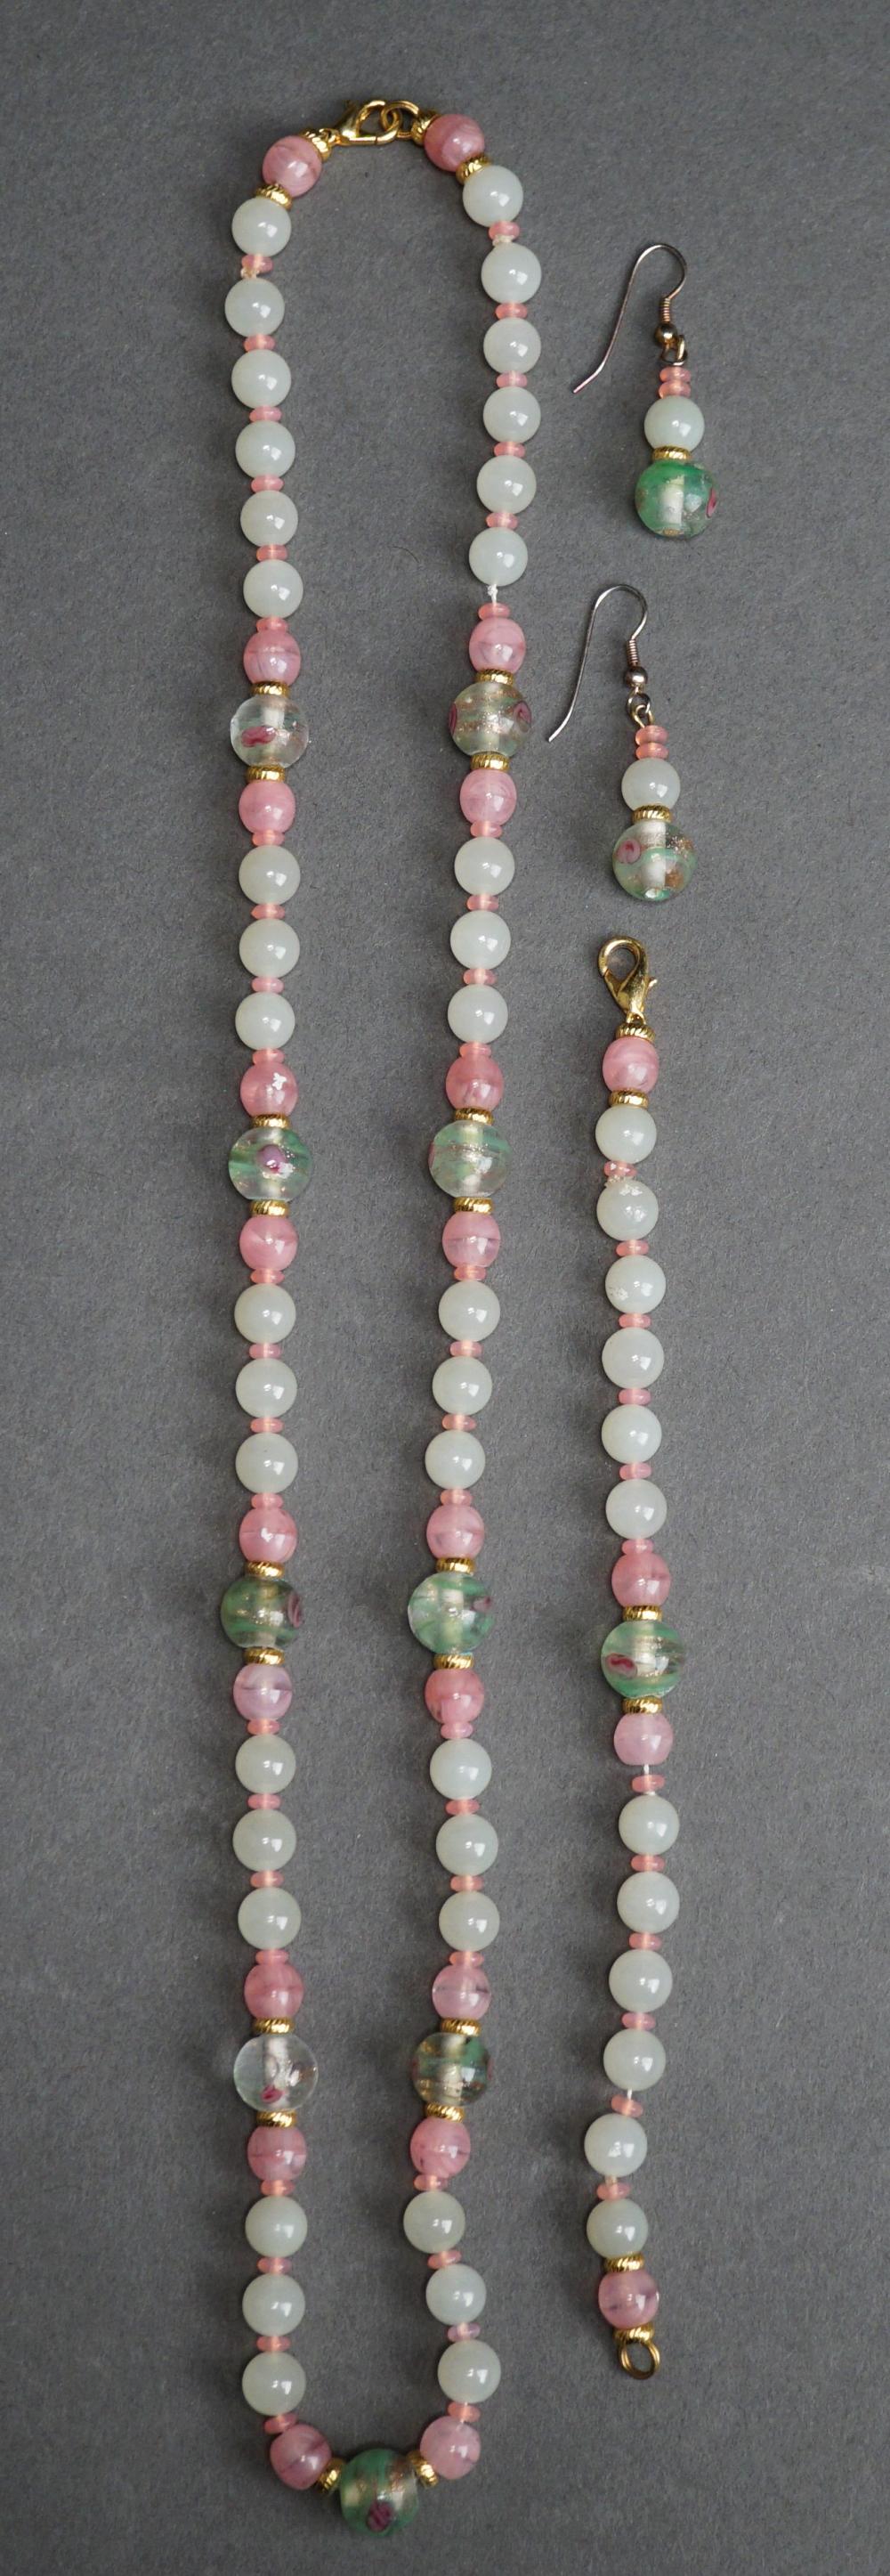 CELADON JADE AND GLASS BEAD NECKLACE,